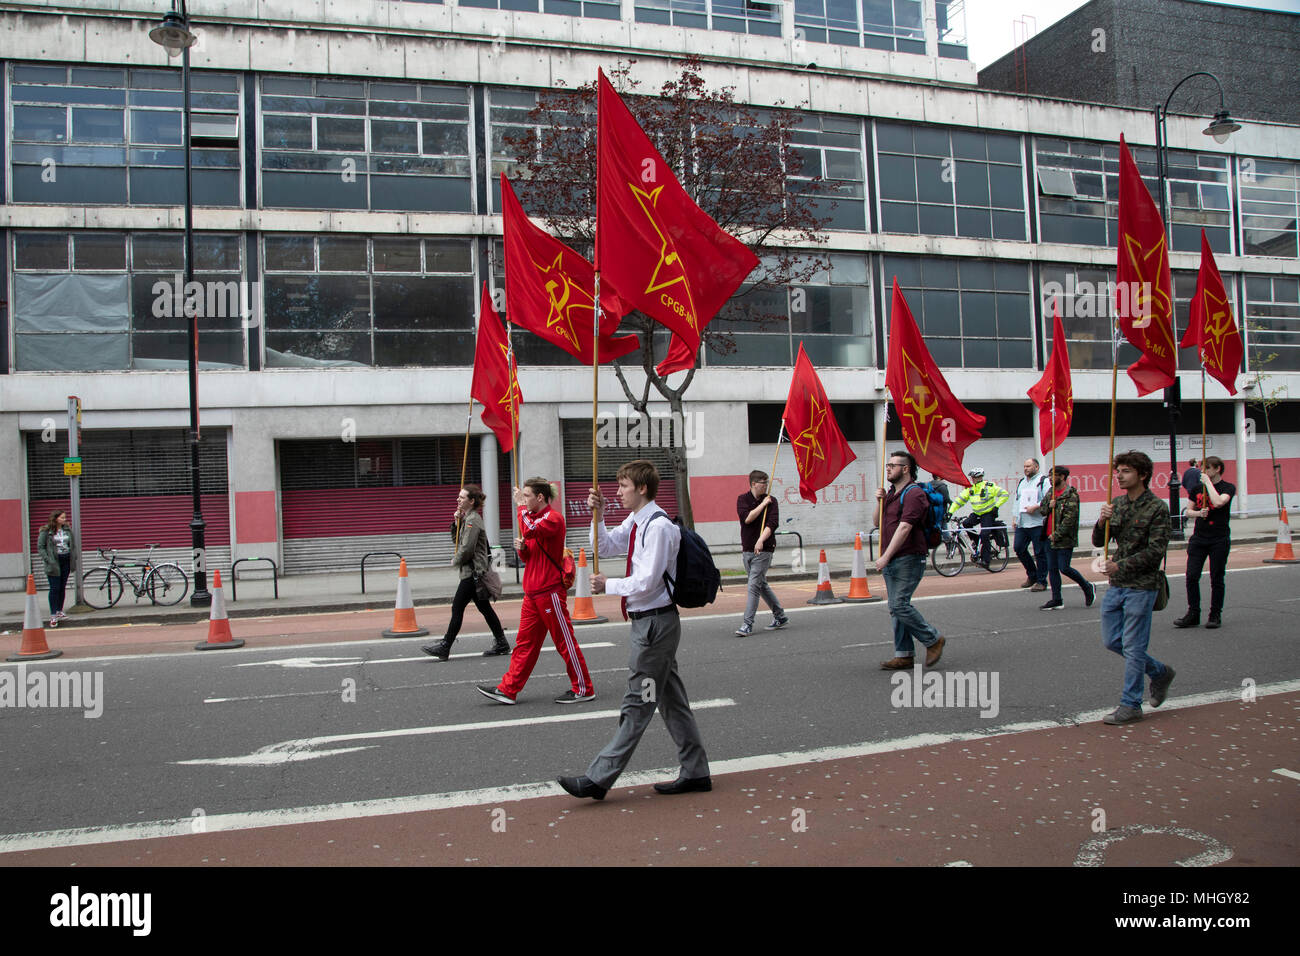 London, UK. 1st May, 2018. Communist Party of Great Britain red flags during May Day celebrations in London, England, United Kingdom. Demonstration by unions and other organisations of workers to mark the annual May Day or Labour Day. Groups from all nationalities from around the World, living in London gathered to march to a rally in central London to mark the global workers day. Credit: Michael Kemp/Alamy Live News Stock Photo